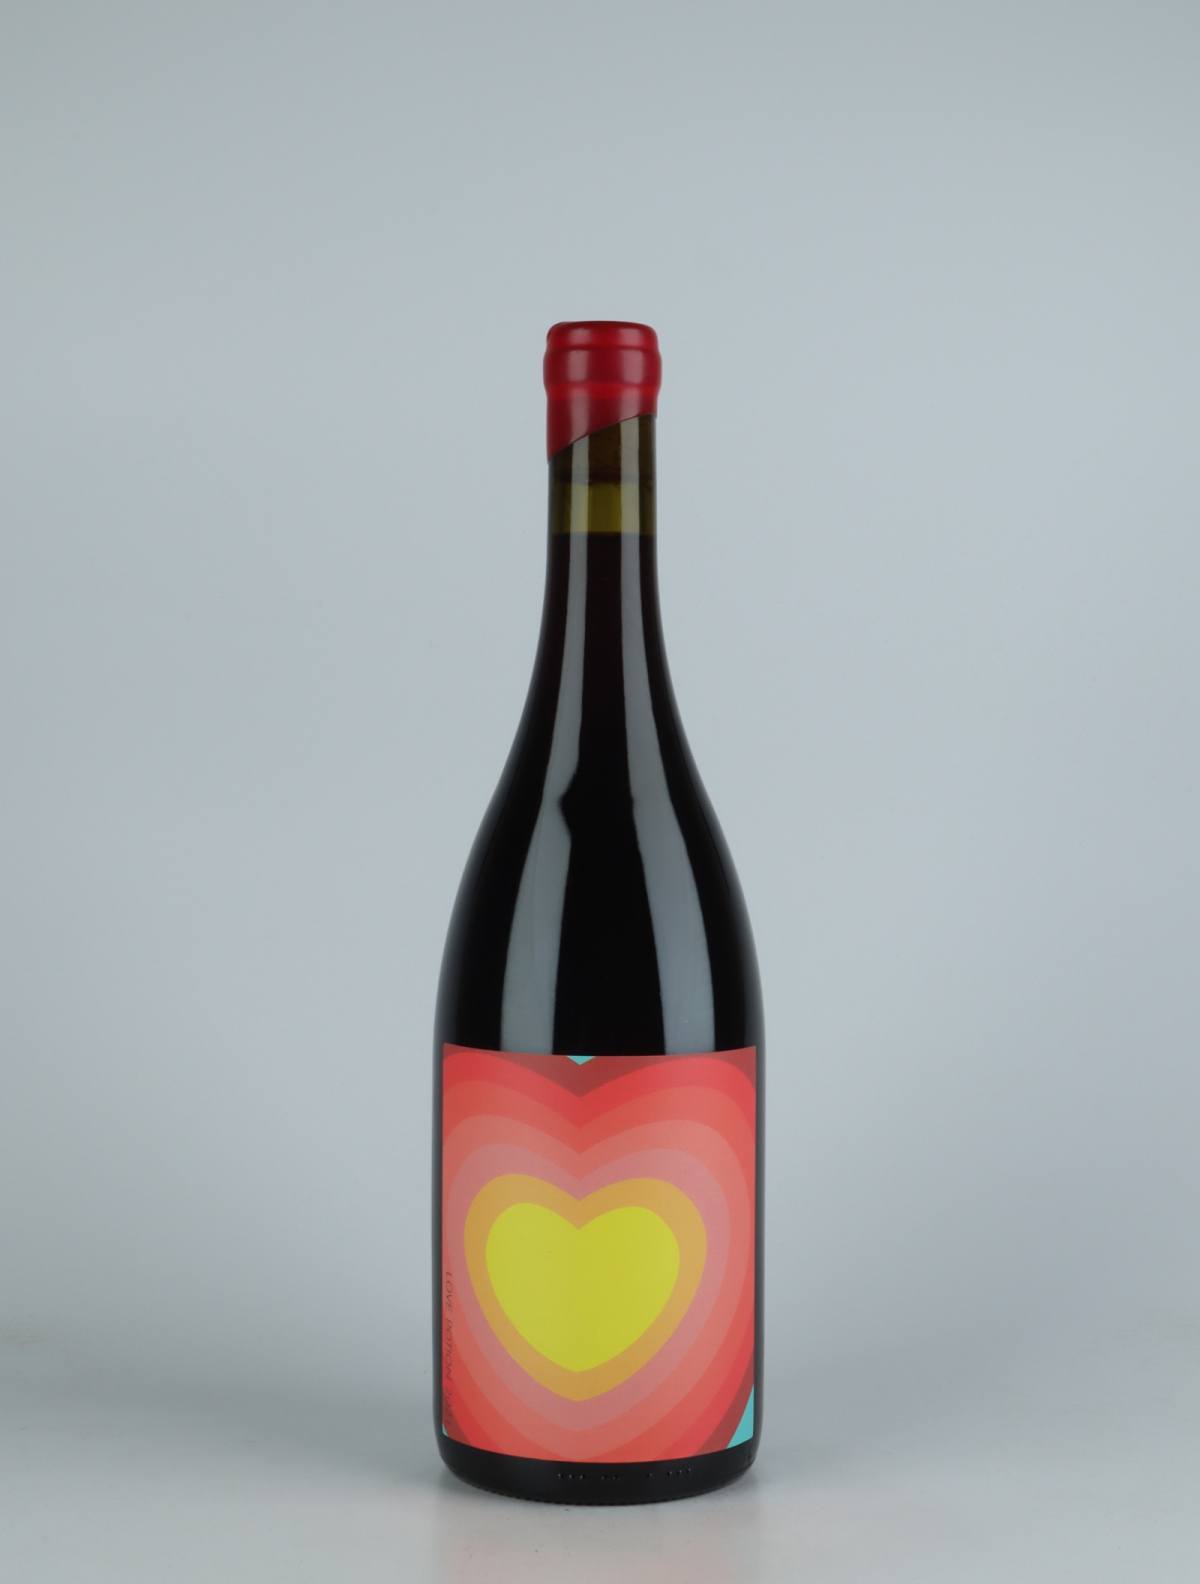 A bottle 2021 Love Potion Red wine from The Other Right, Adelaide Hills in Australia